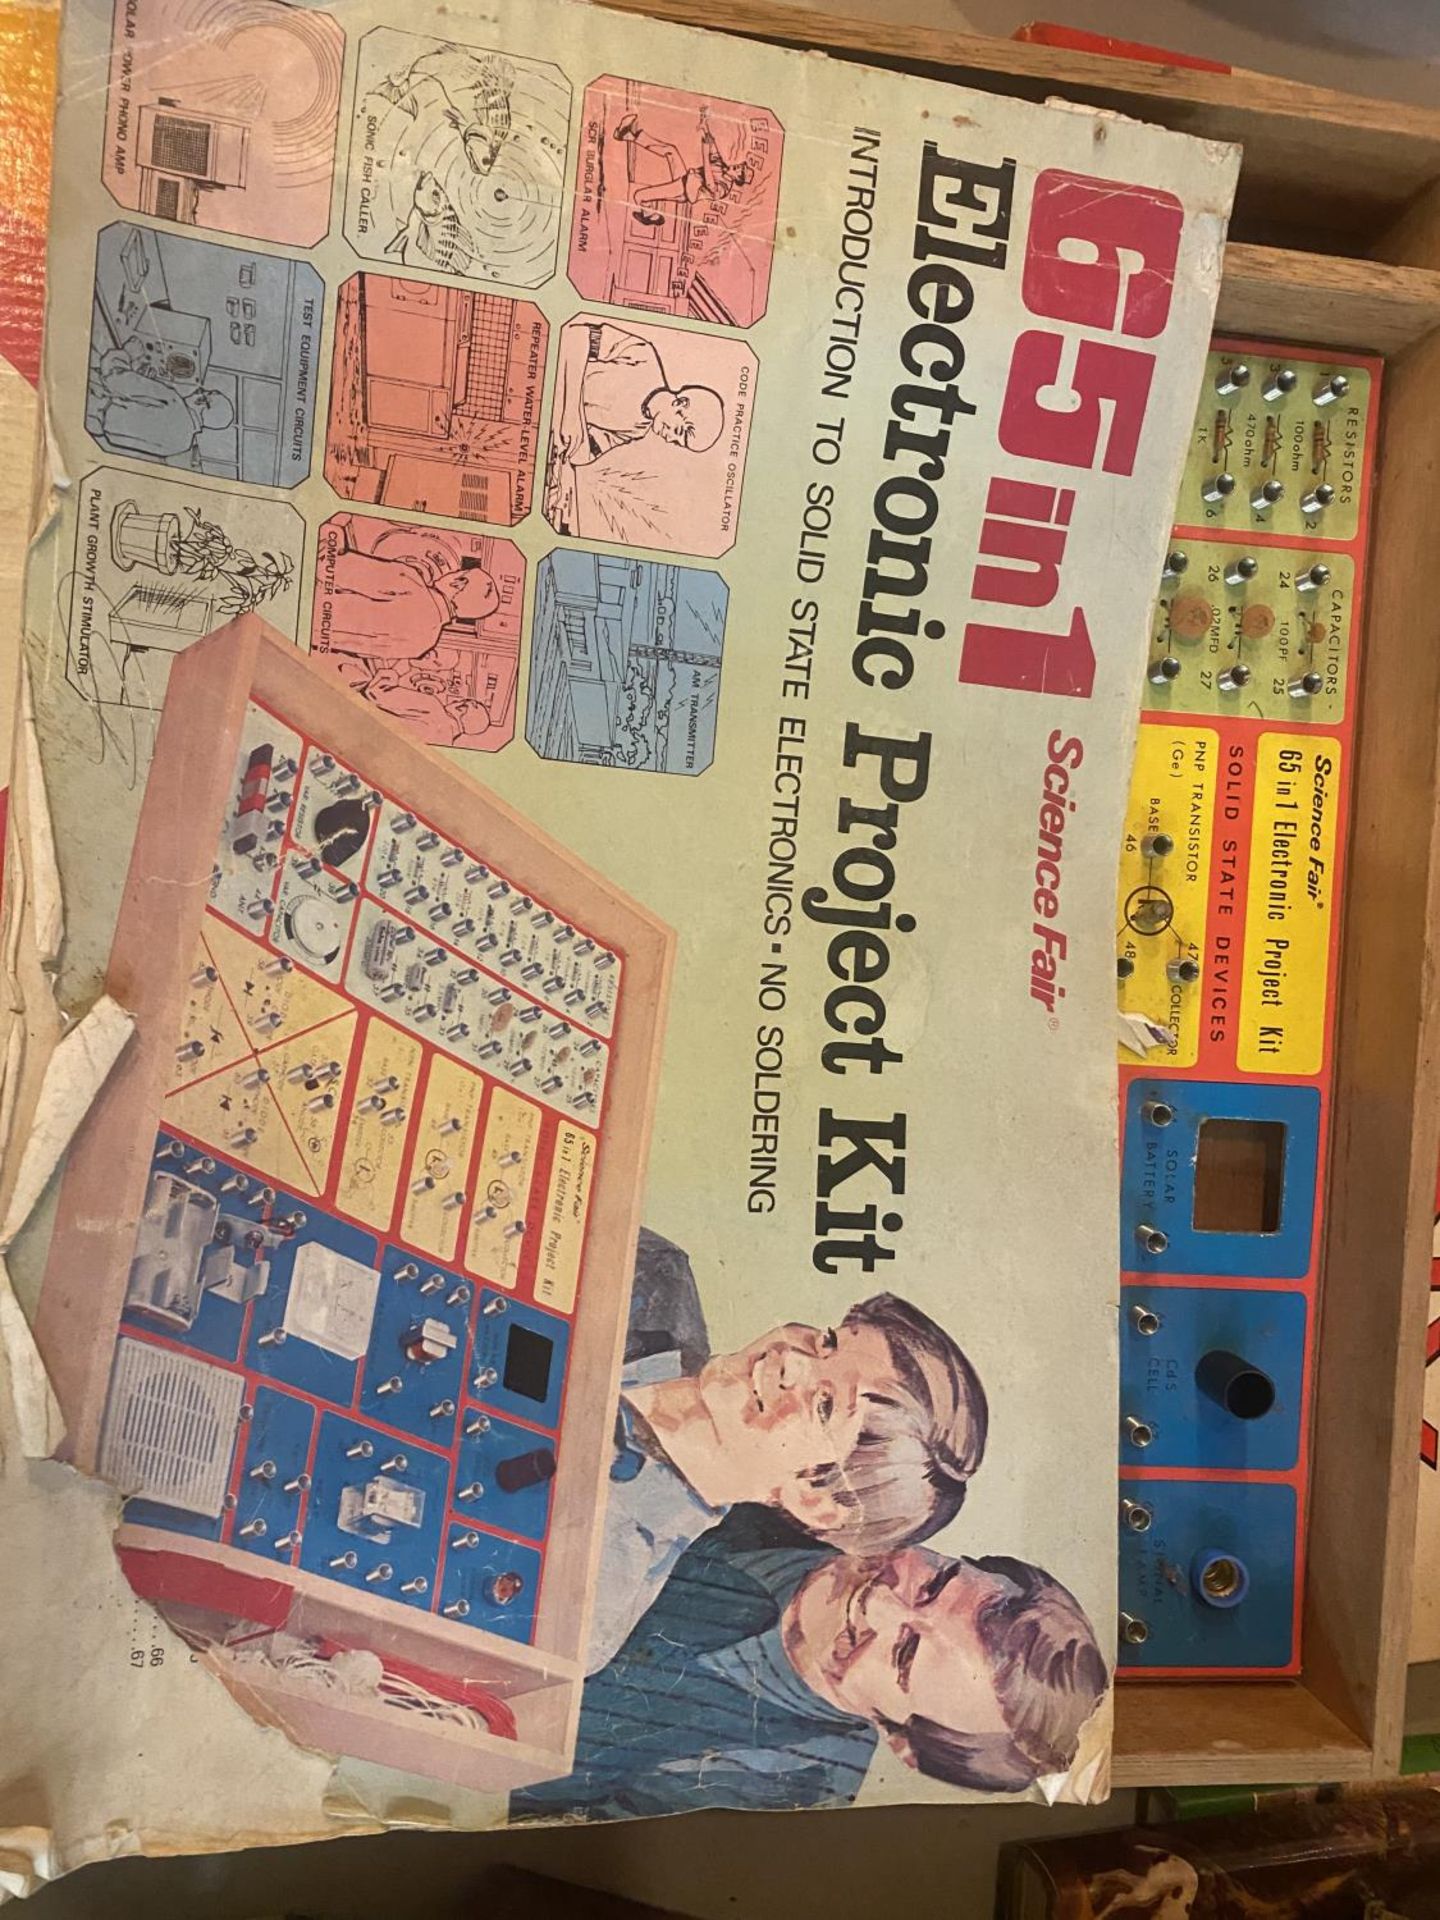 A VINTAGE MONOPOLY SET, COMPACT MECHANICAL ENGINEER SET AND AN ELECTRONIC PROJECT KIT - Image 2 of 4